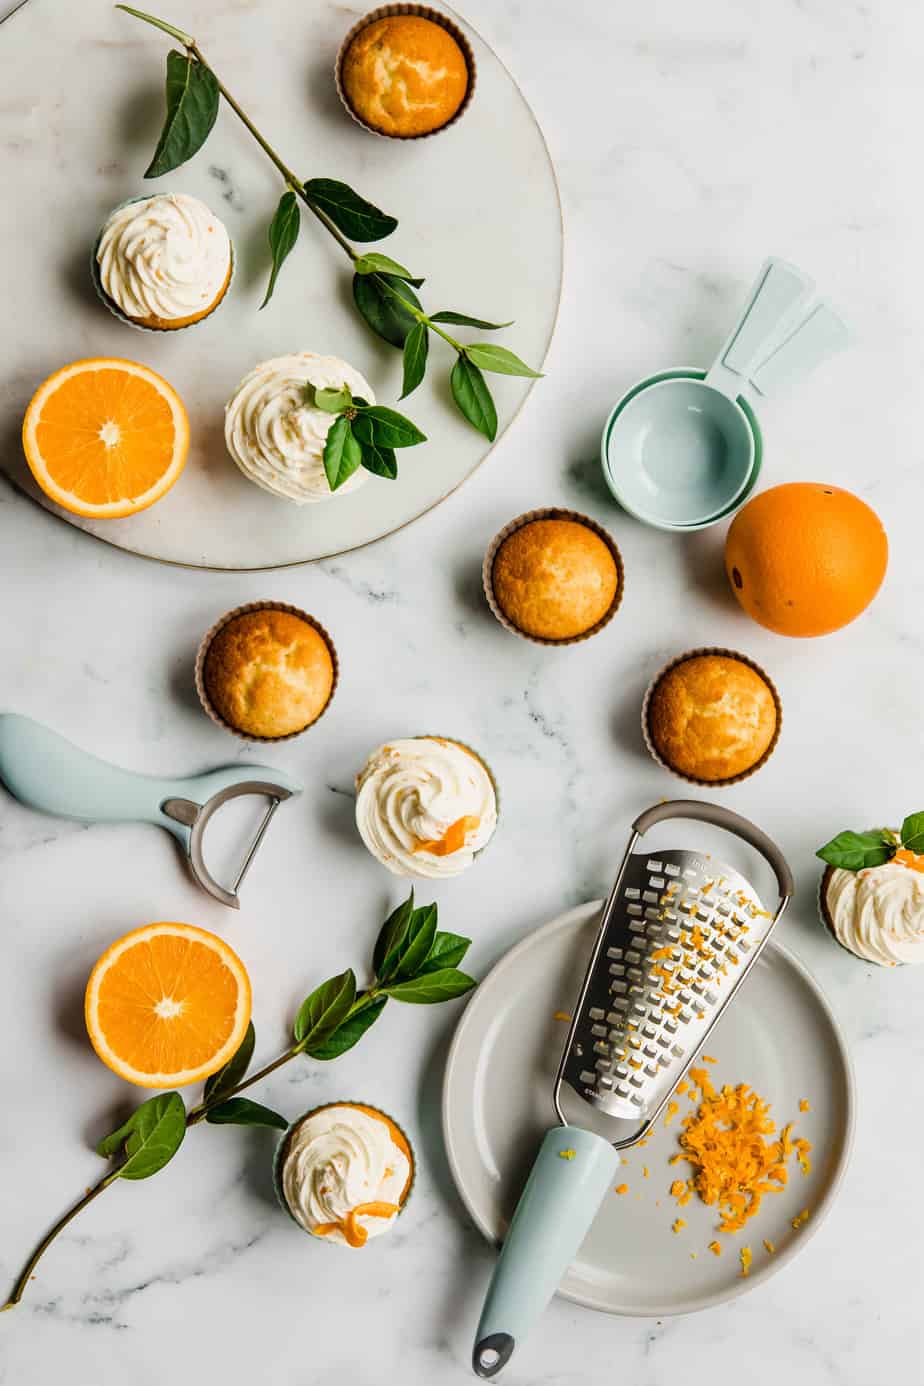 Vanilla cupcakes and fresh oranges on a marble background.